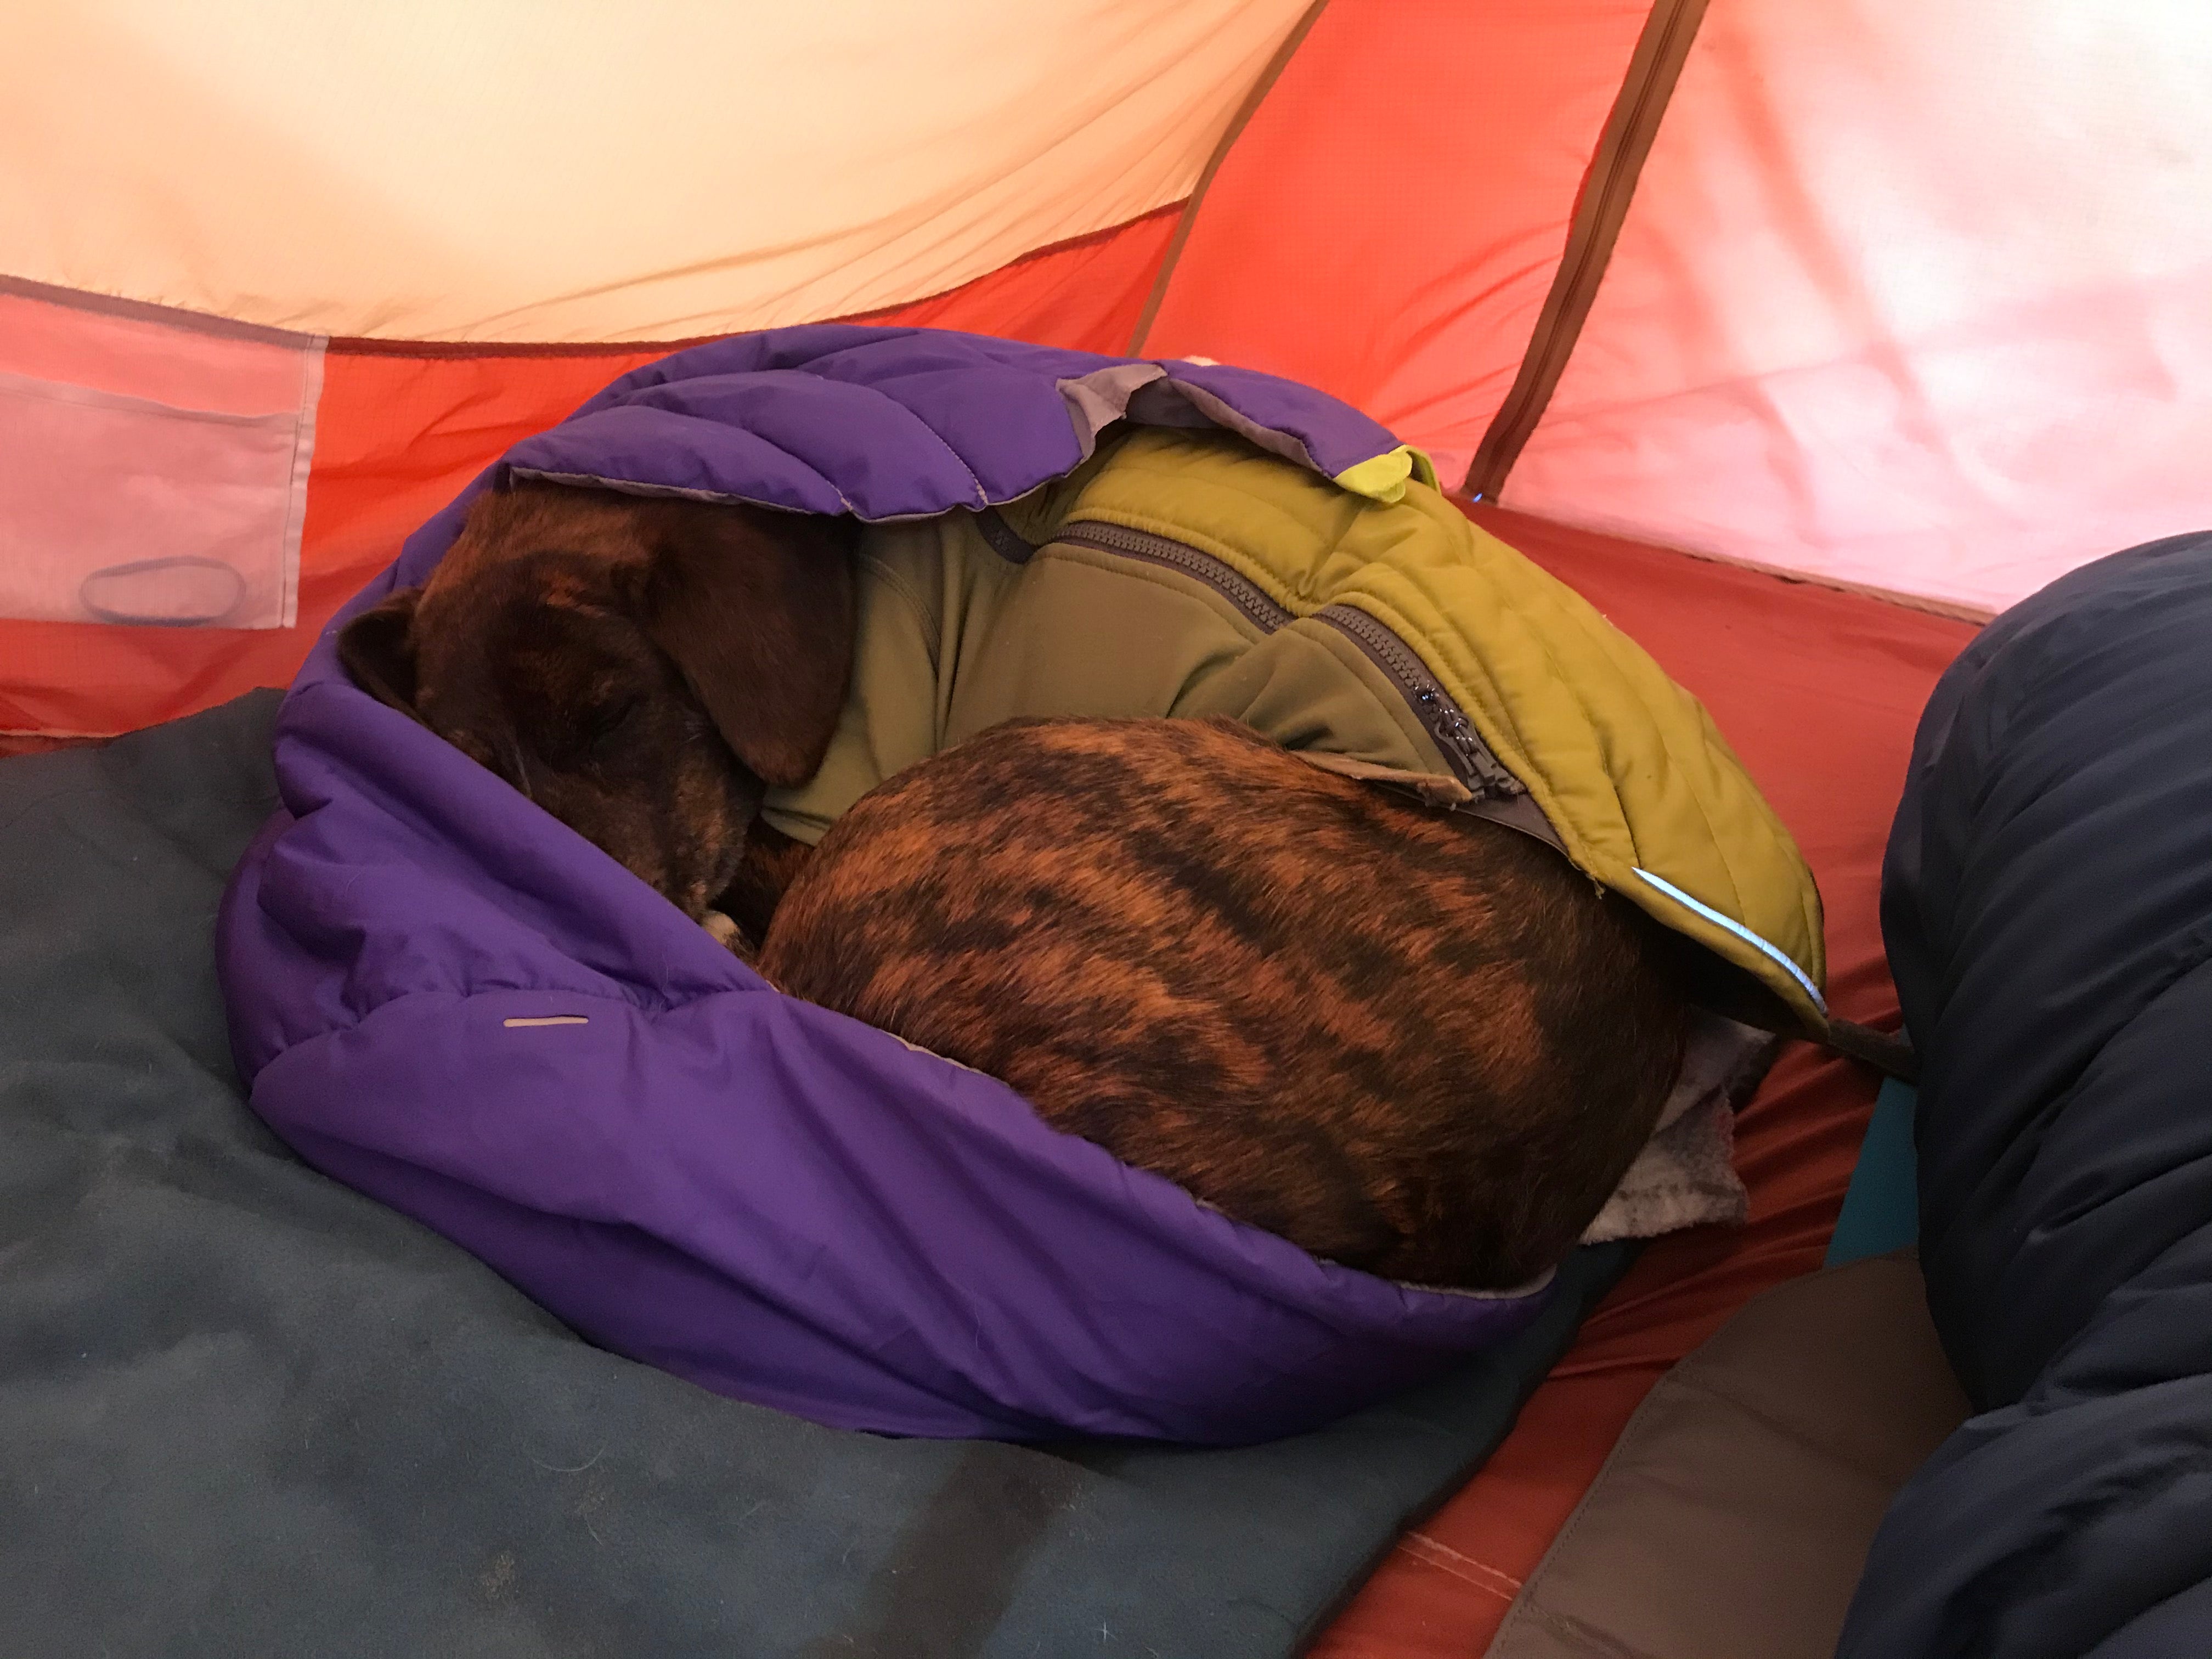 dog curled up, sleeping in a sleeping bag inside a tent